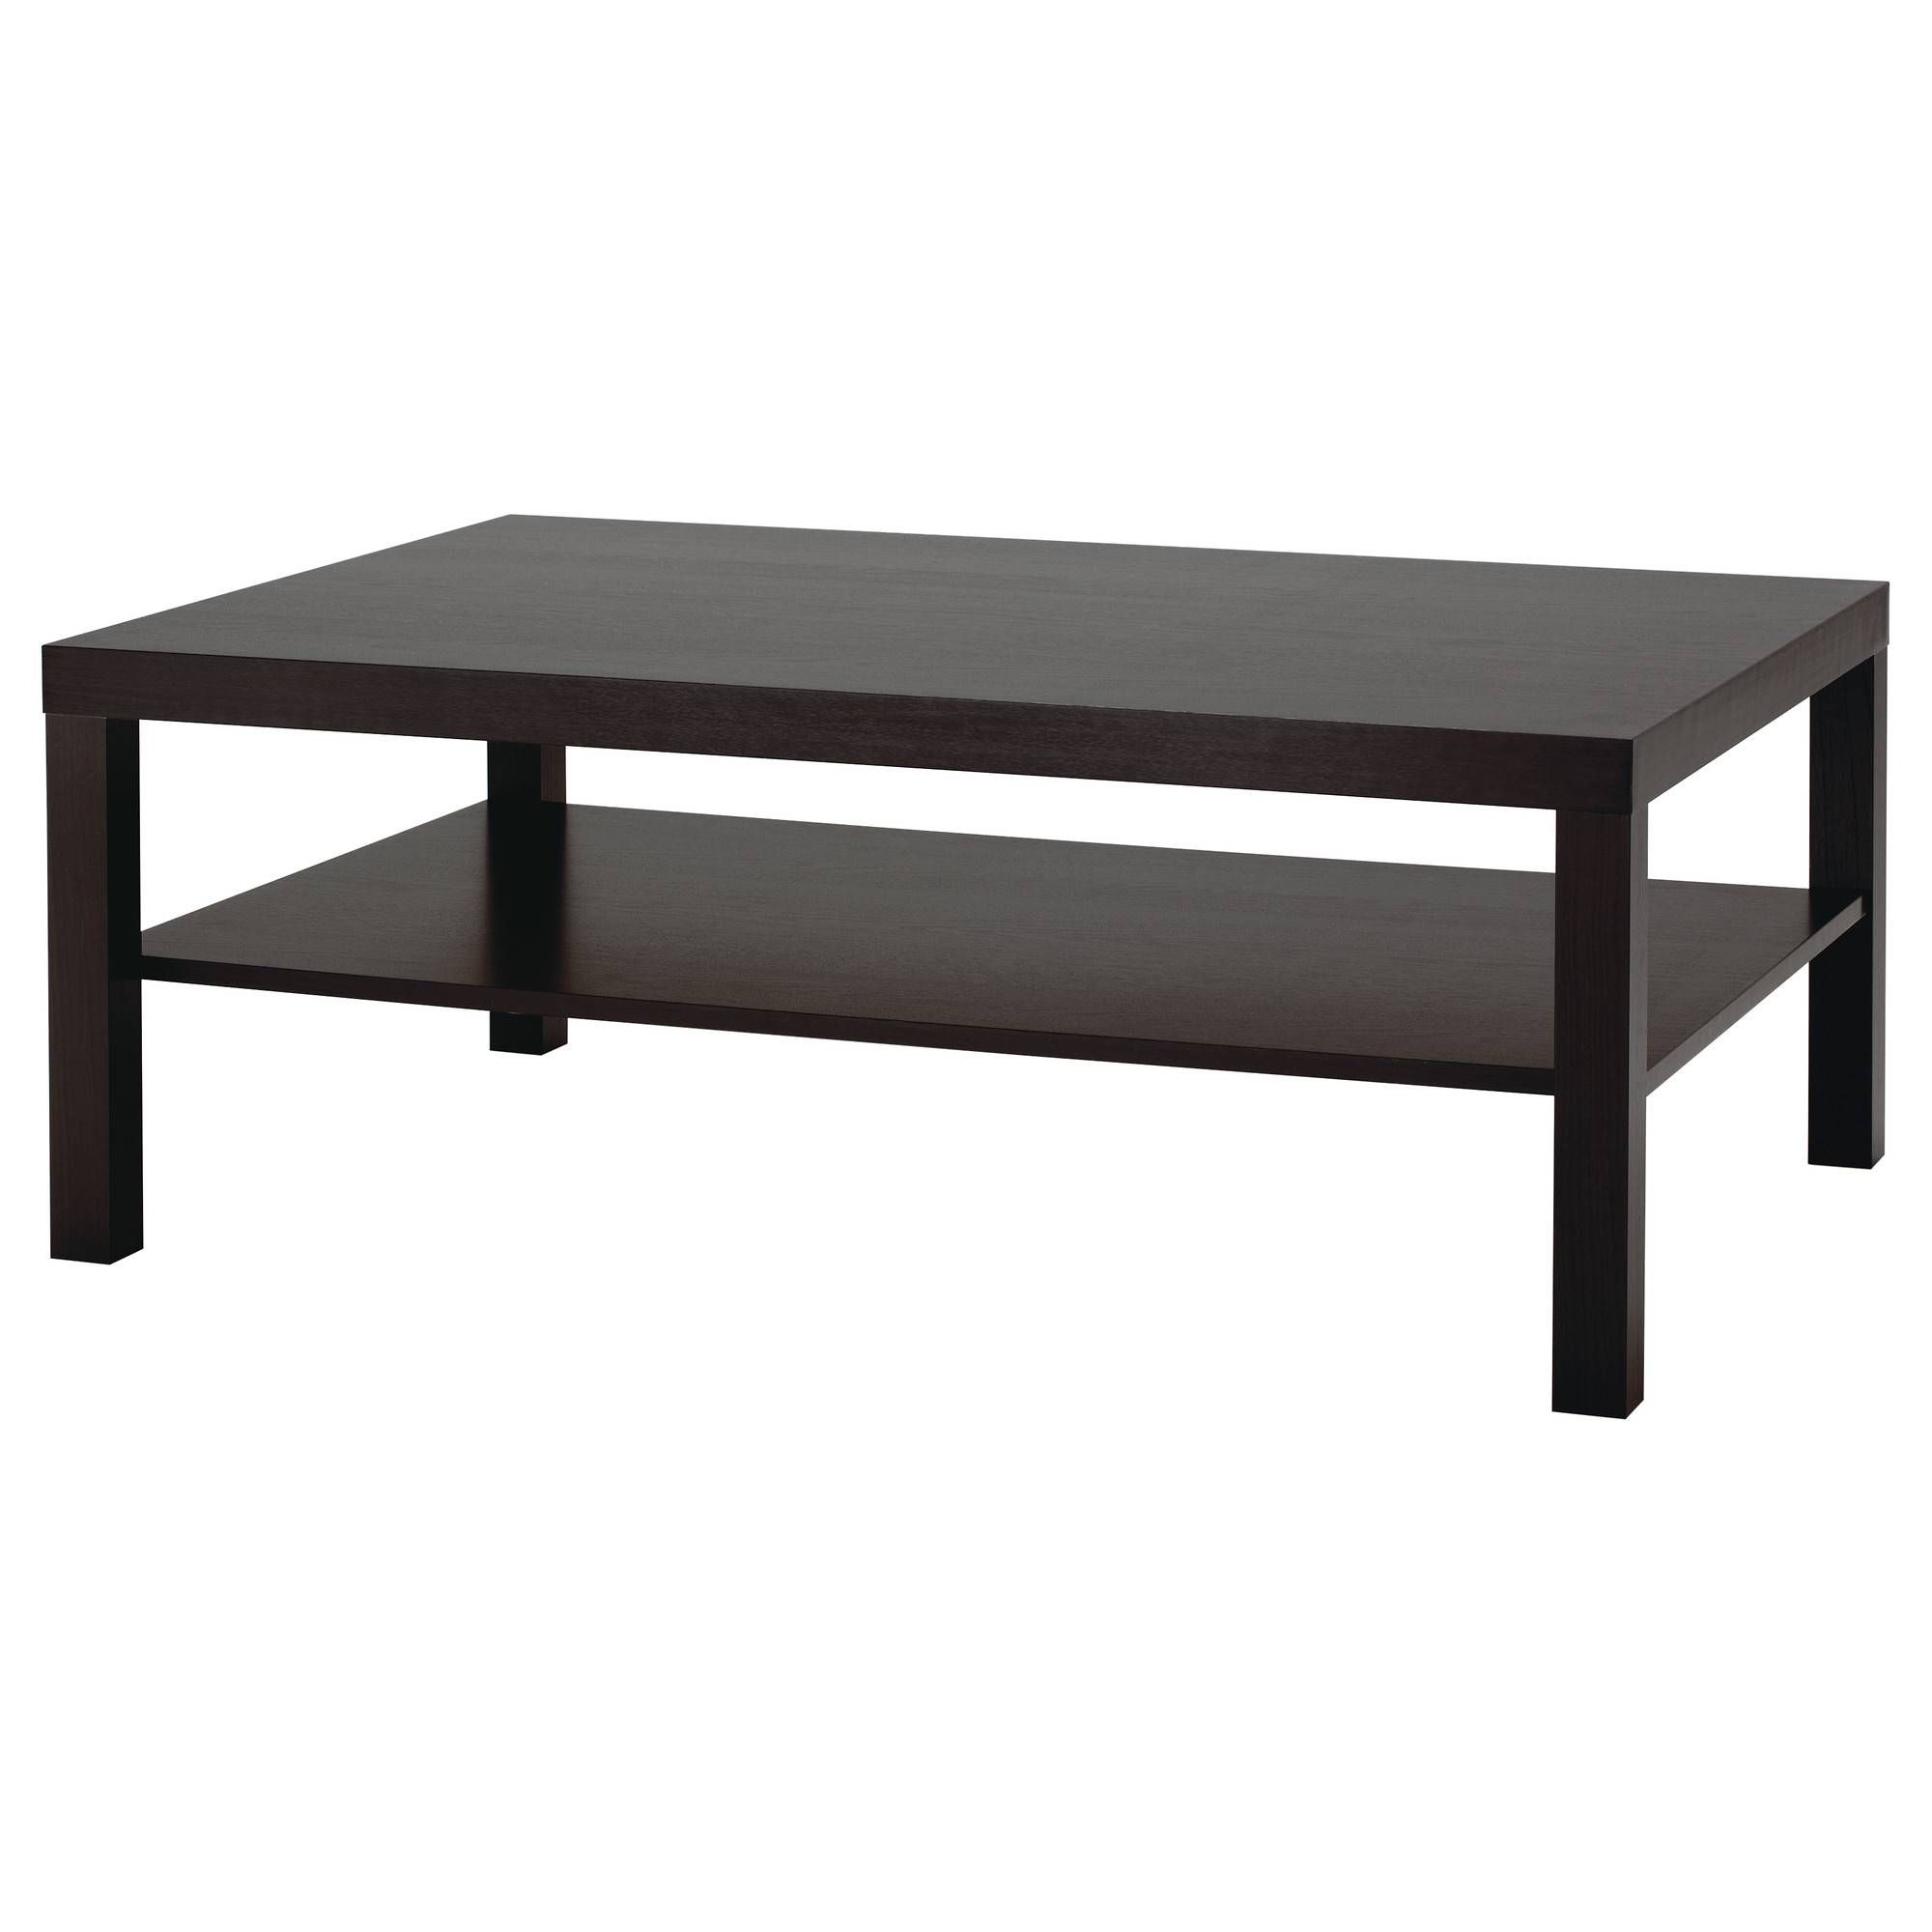 Glass And Dark Wood Coffee Table G Home Design | Genty Throughout Black Wood Coffee Tables (View 18 of 30)